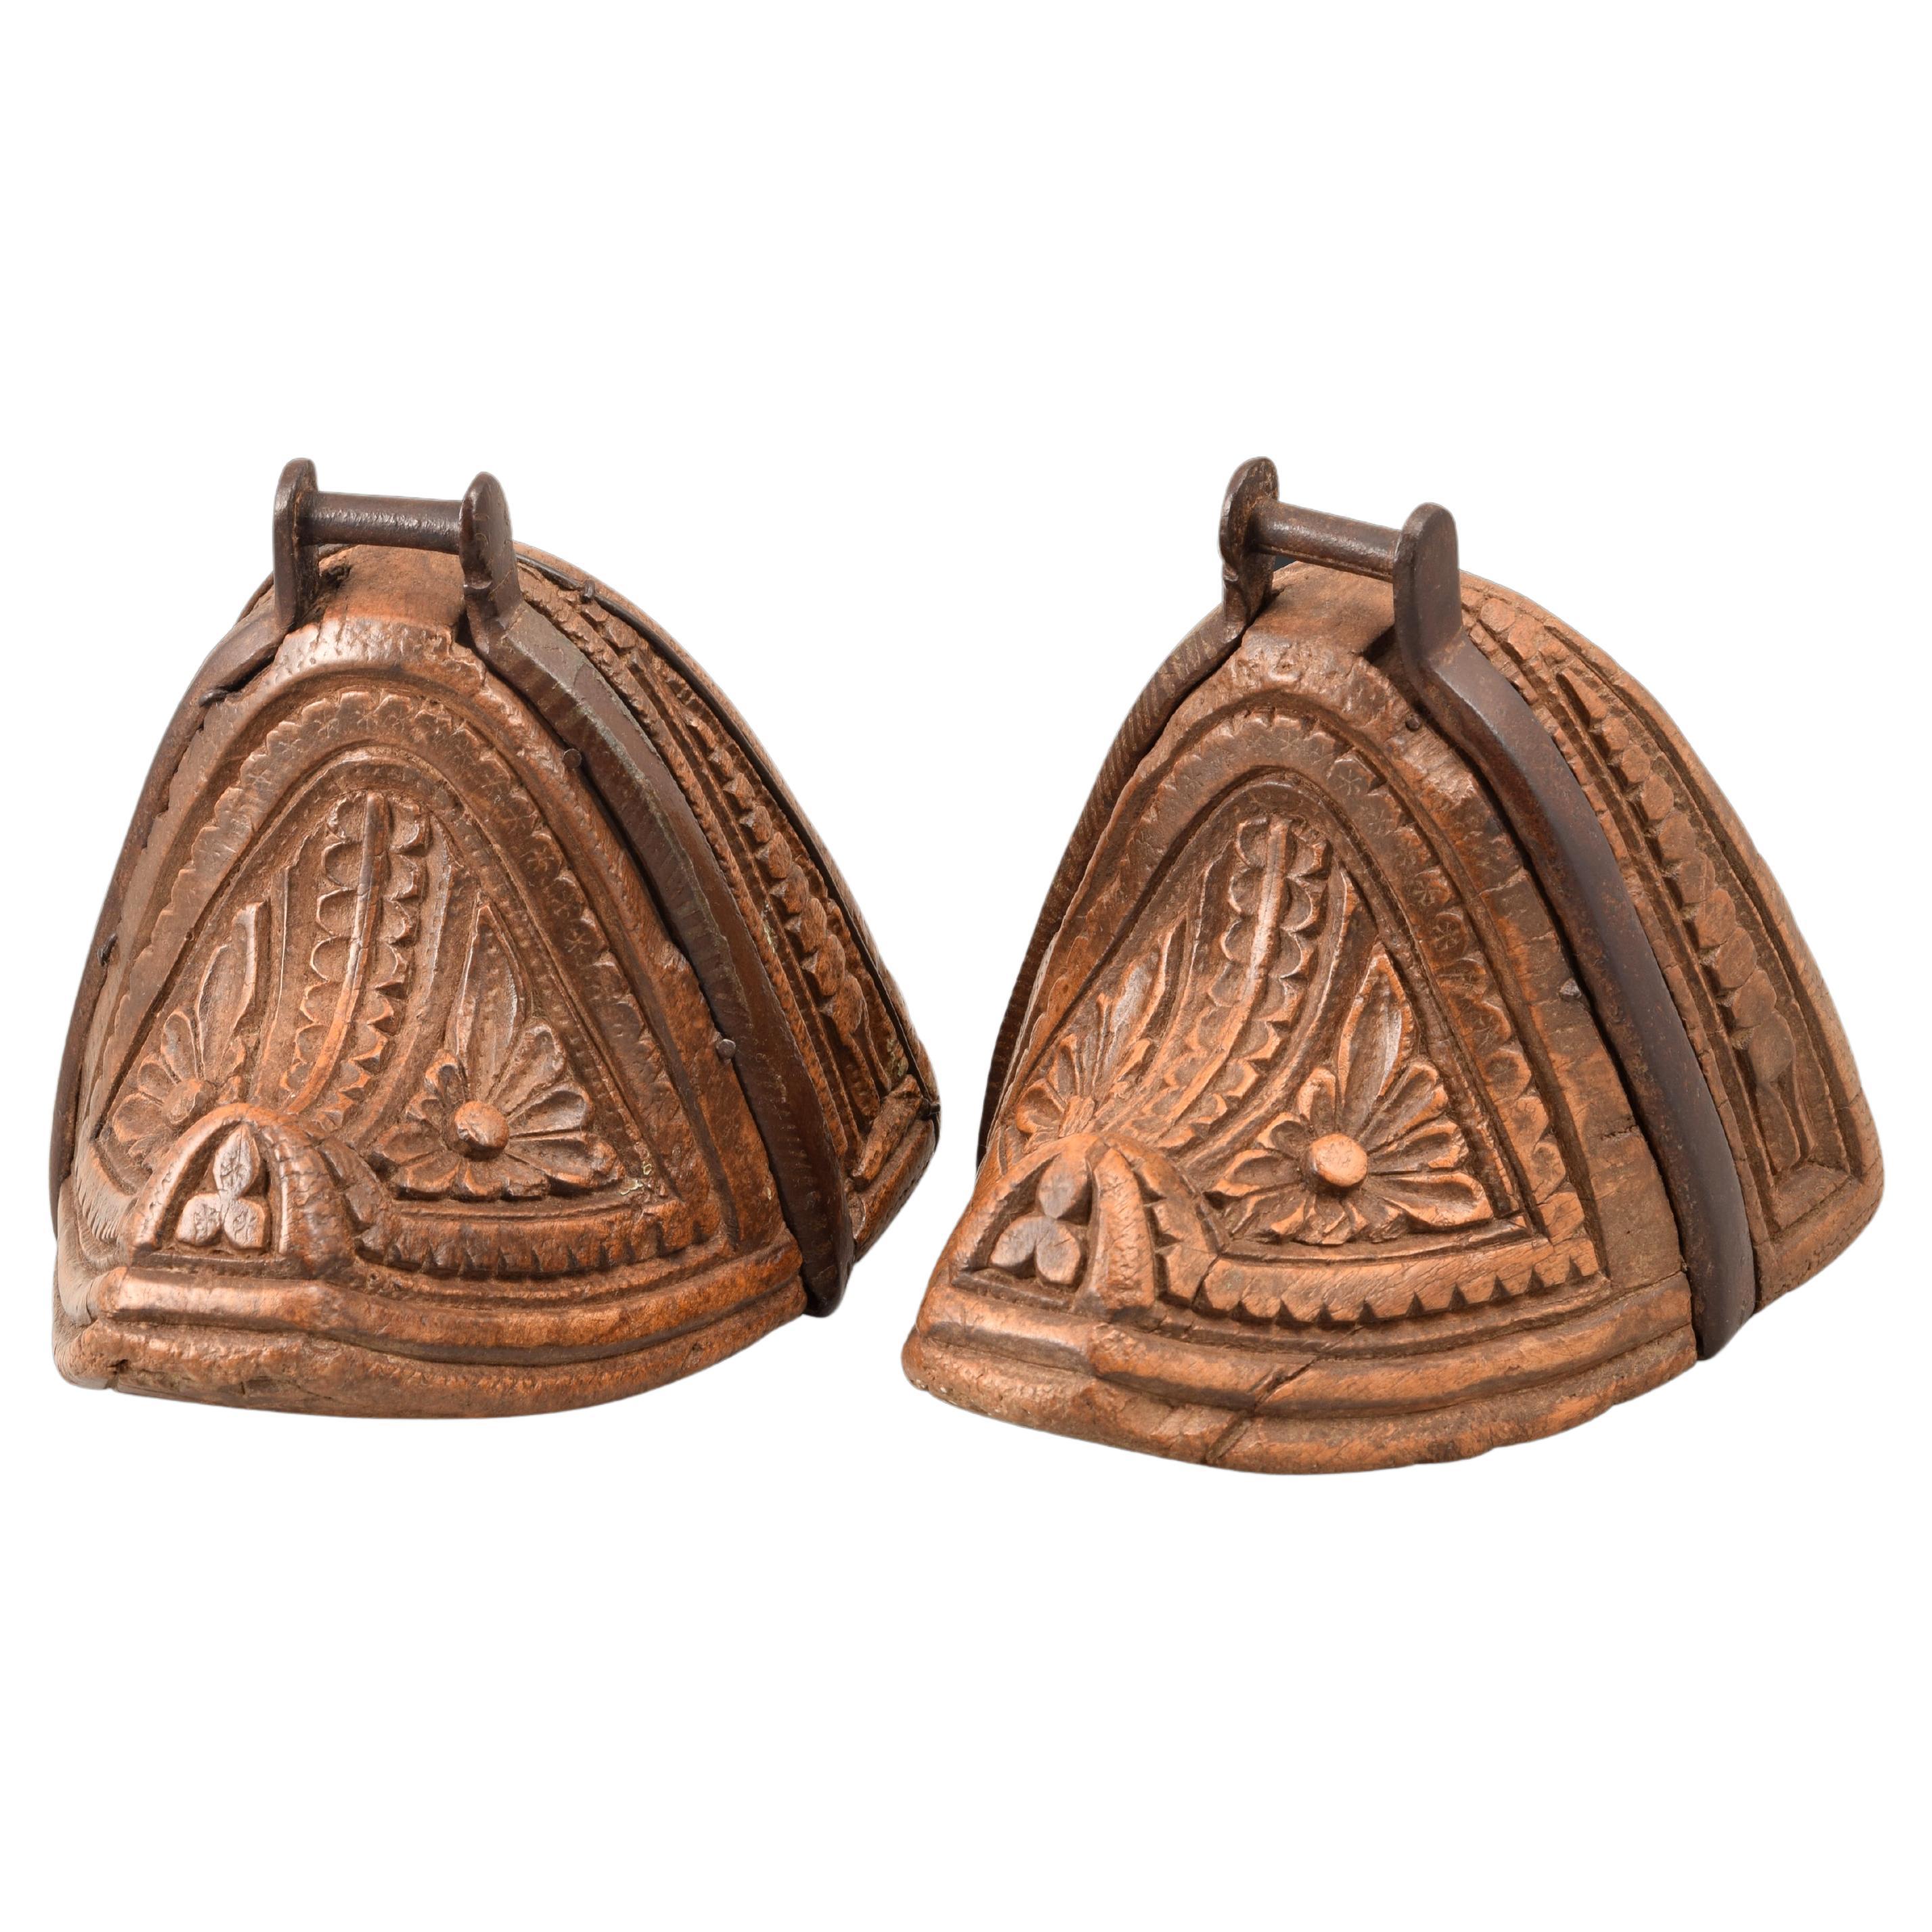 Pair of stirrups. Carved wood, iron. Chile, 18th century. 